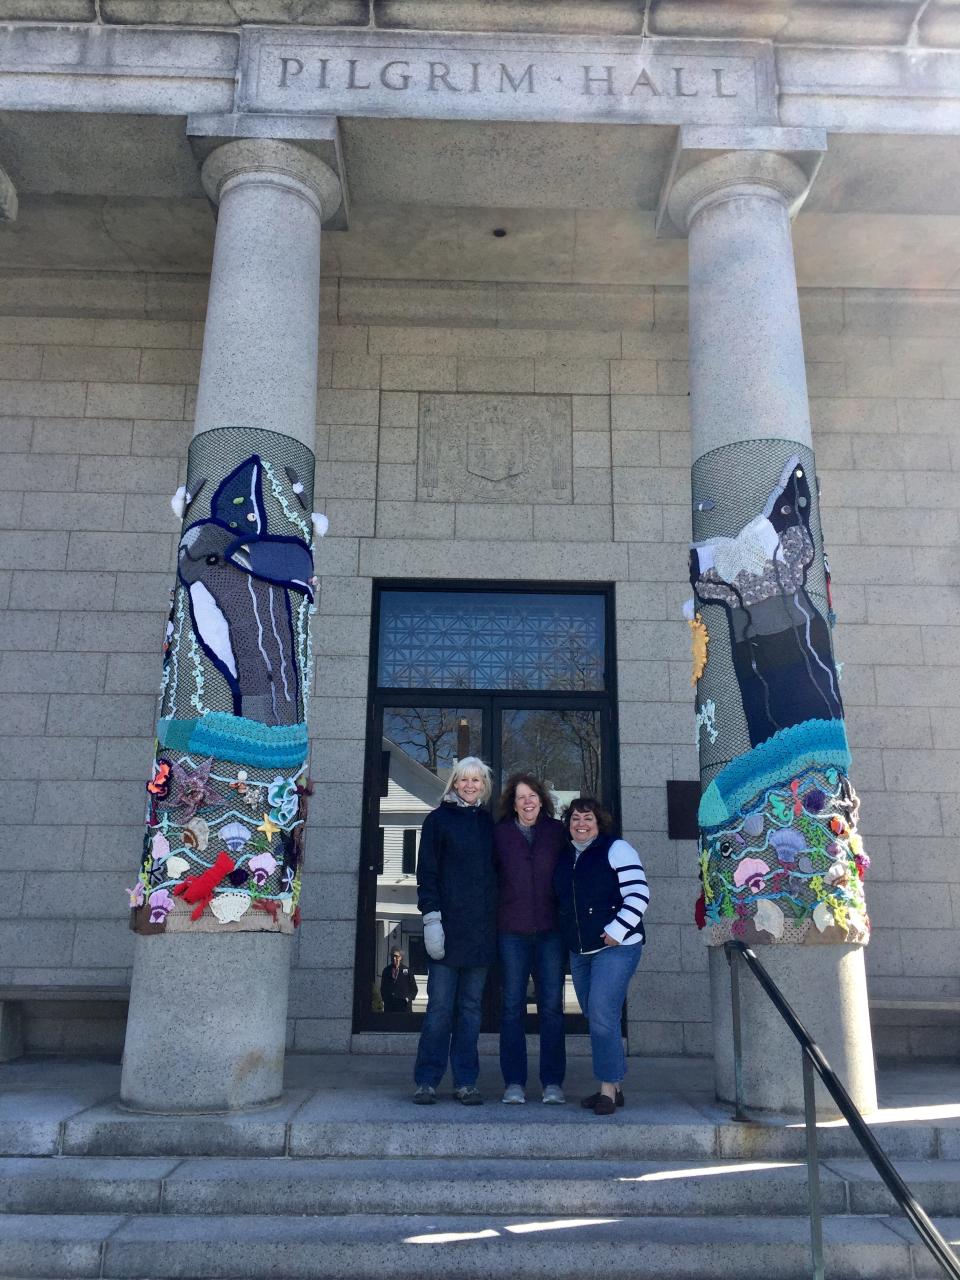 The pillars of Pilgrim Hall Museum are decorated with sea creatures for a public art display called Yarn Pop.